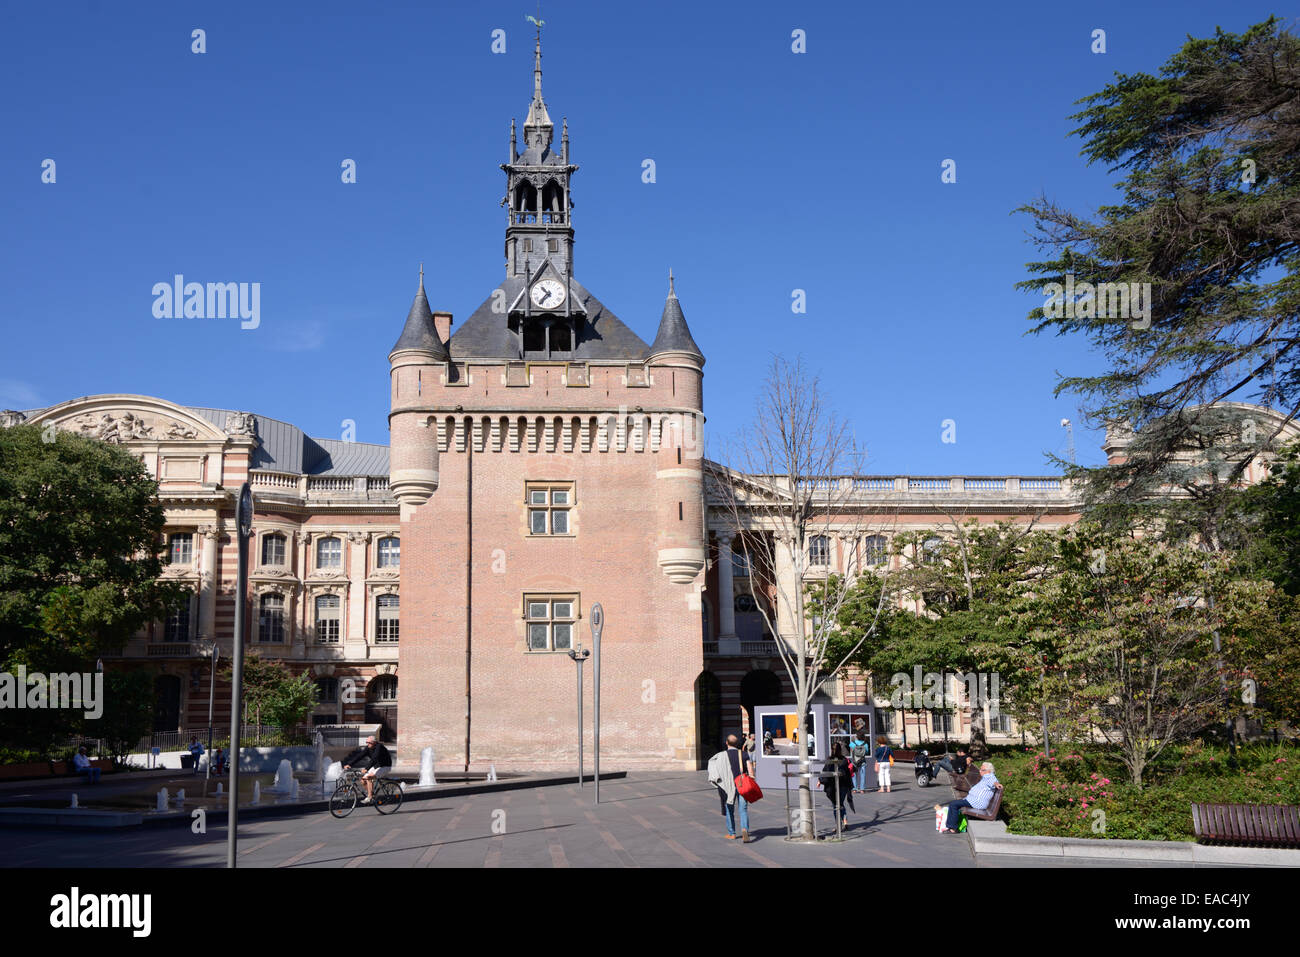 Place du Capitole Dungeon or Donjon Medieval Stone Tower & City Center Landmark Toulouse France Stock Photo